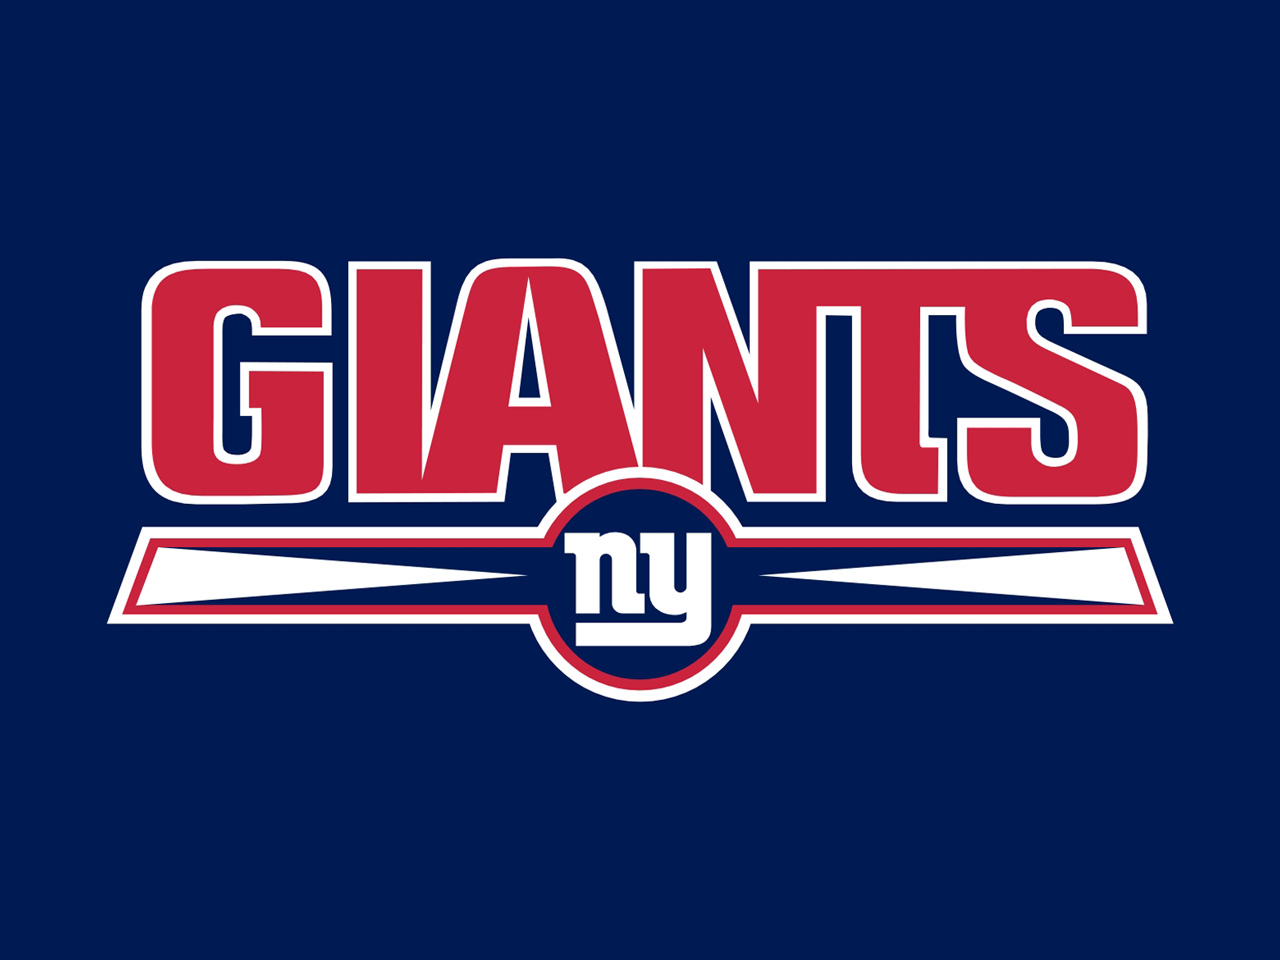 New York Giants Wallpaper Image Graphics Ments And Pictures